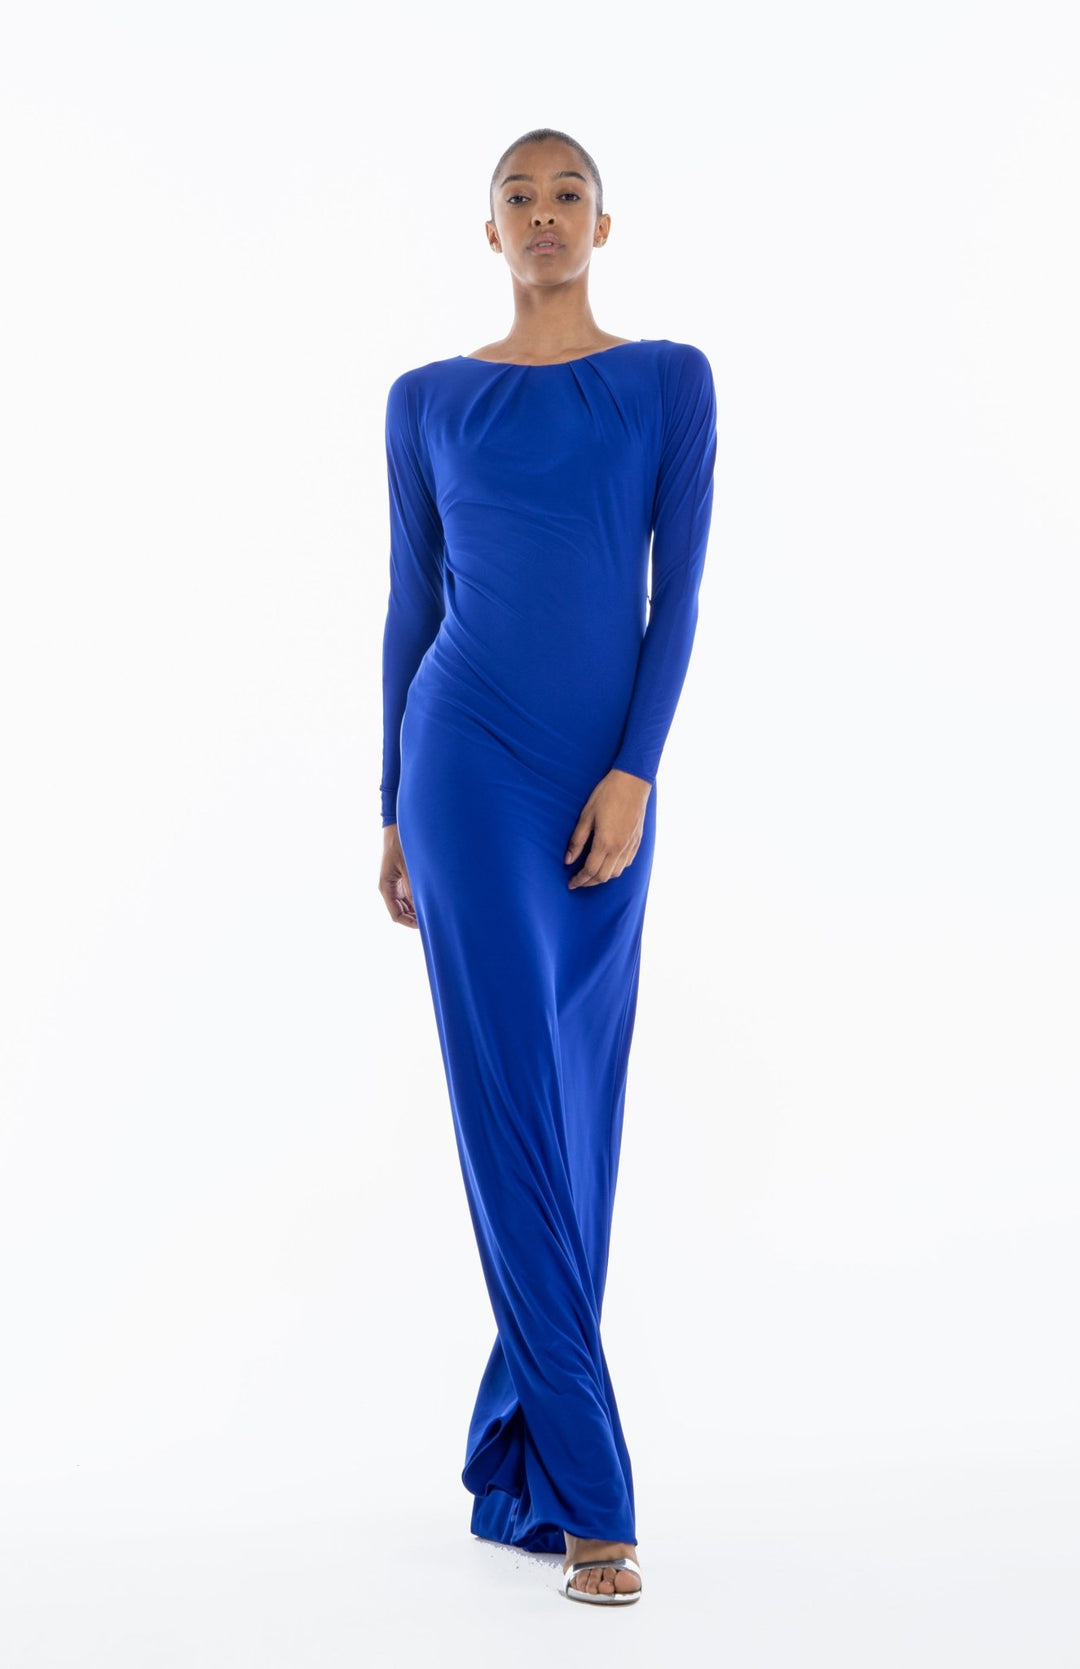 Chic, Grecian style, long backless dress, with back cutout detail in royal blue jersey knit